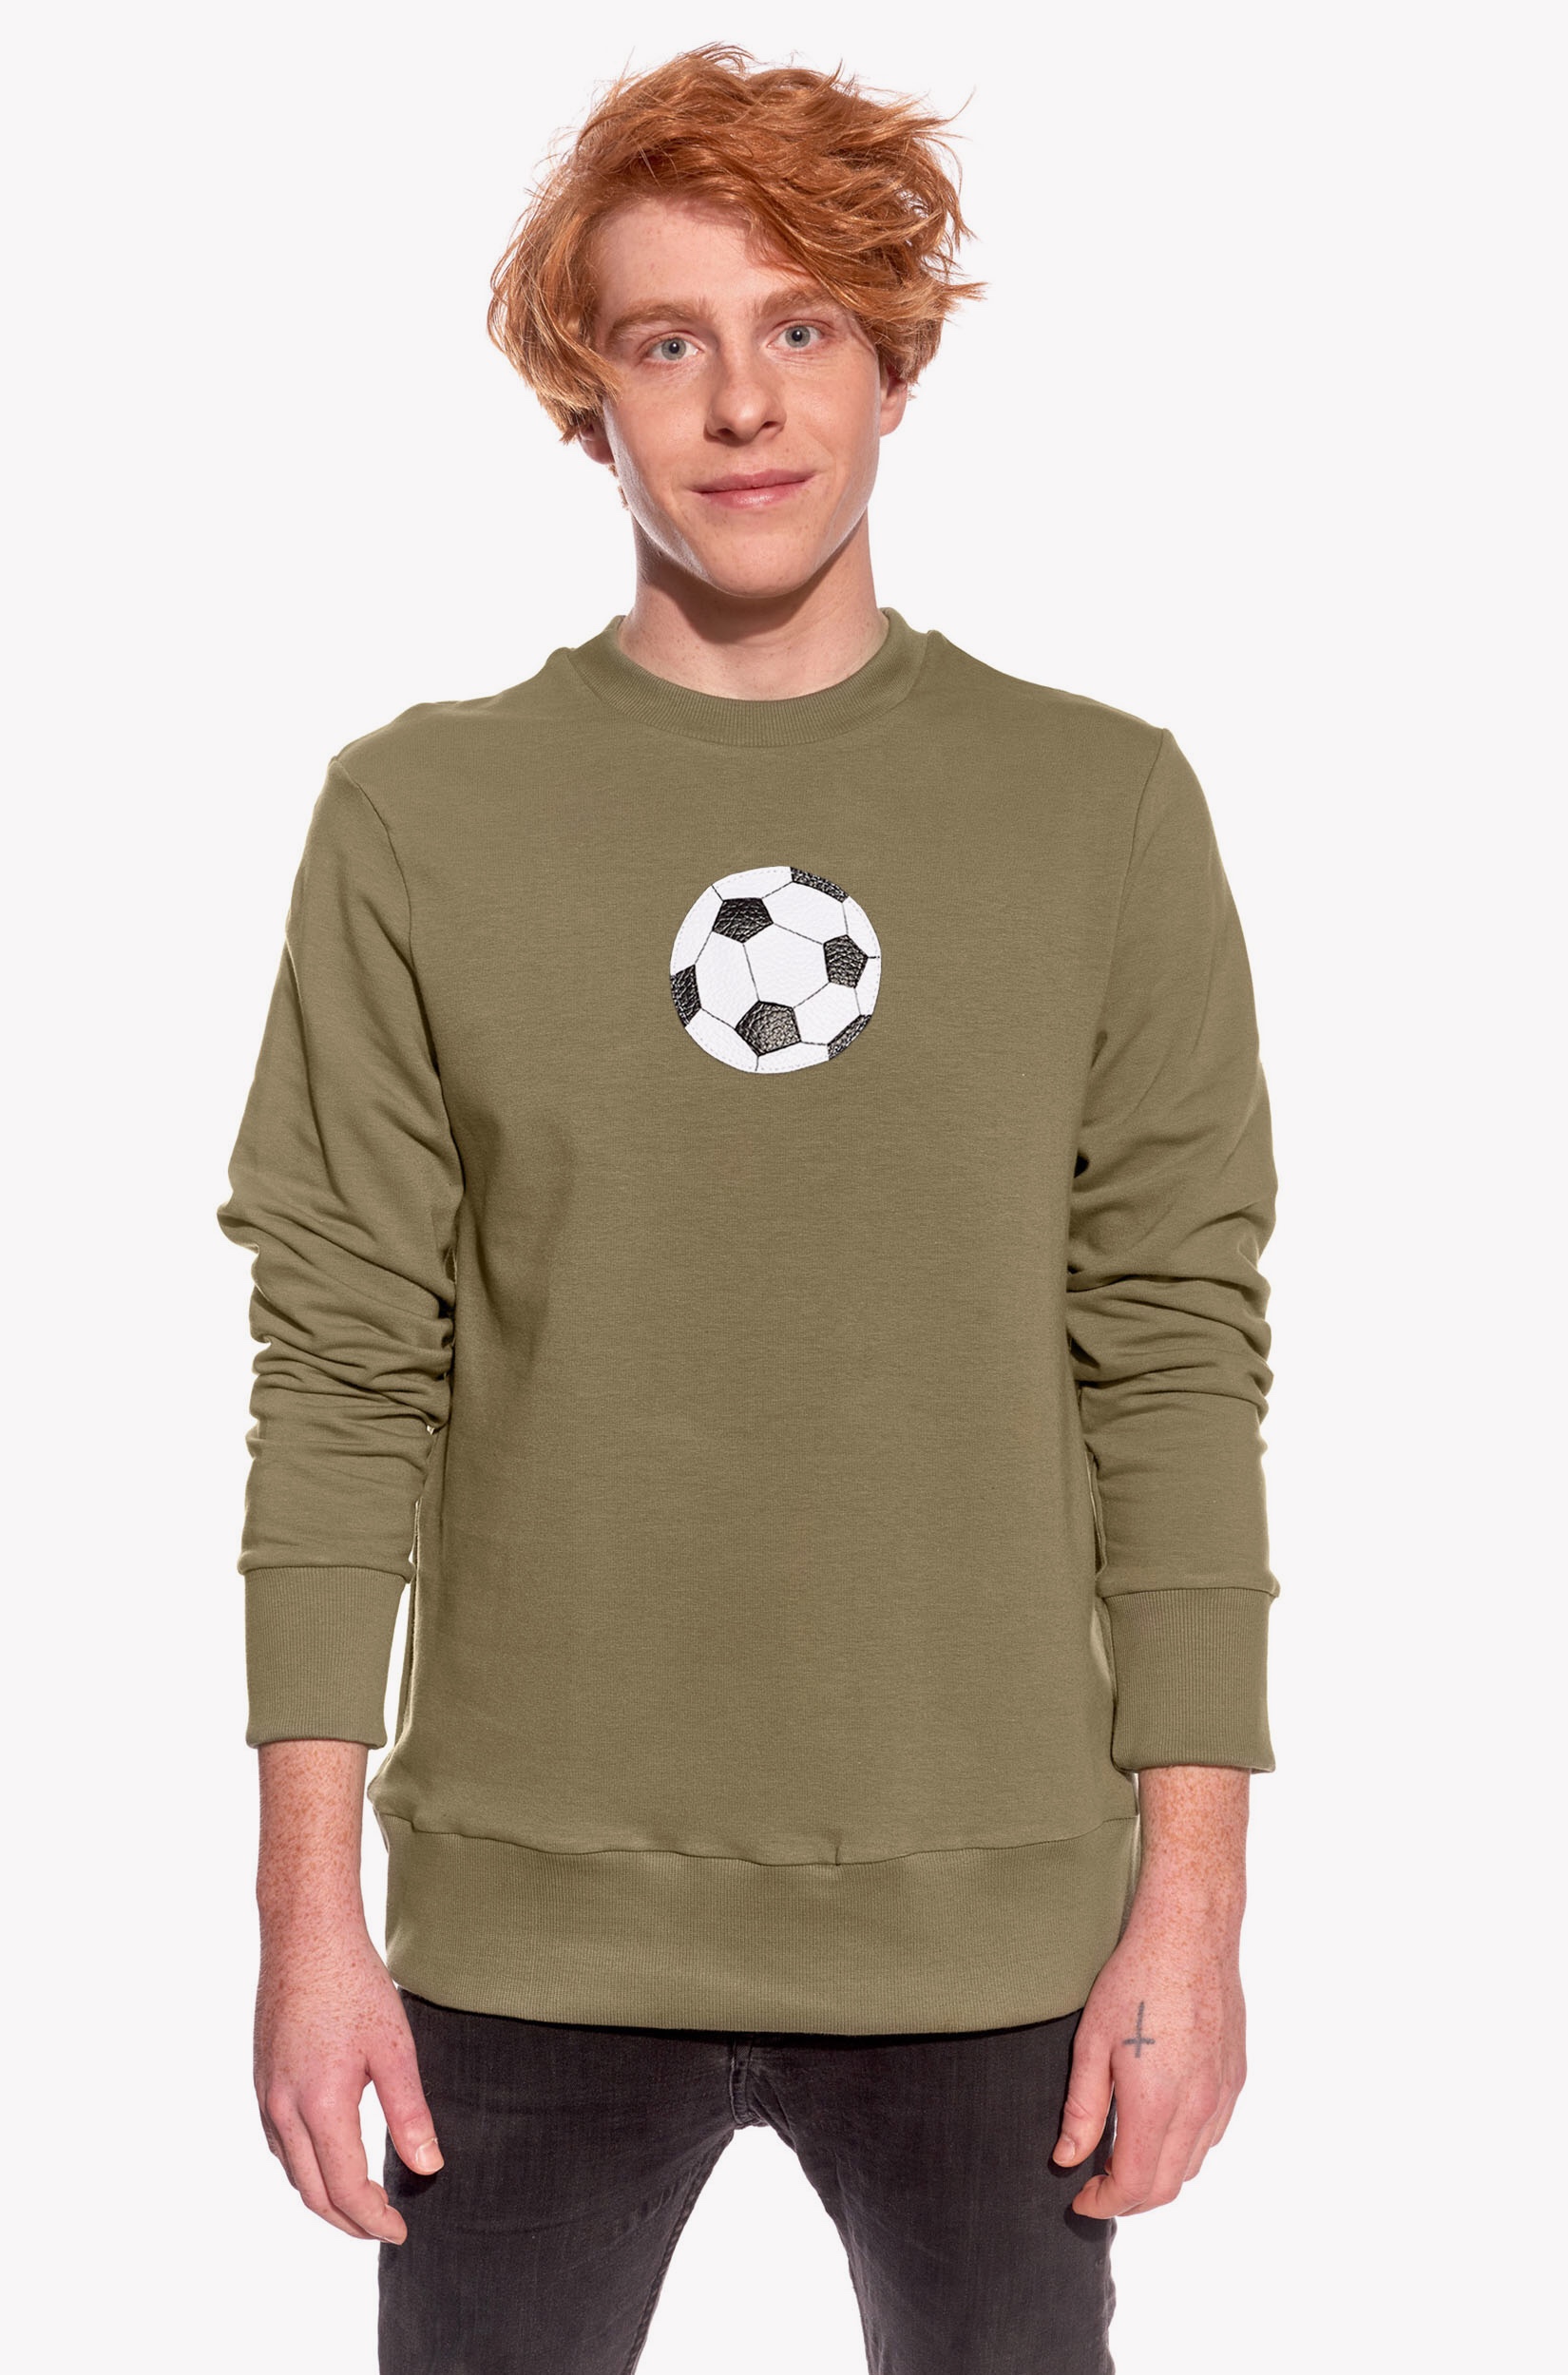 Hoodie with soccer ball